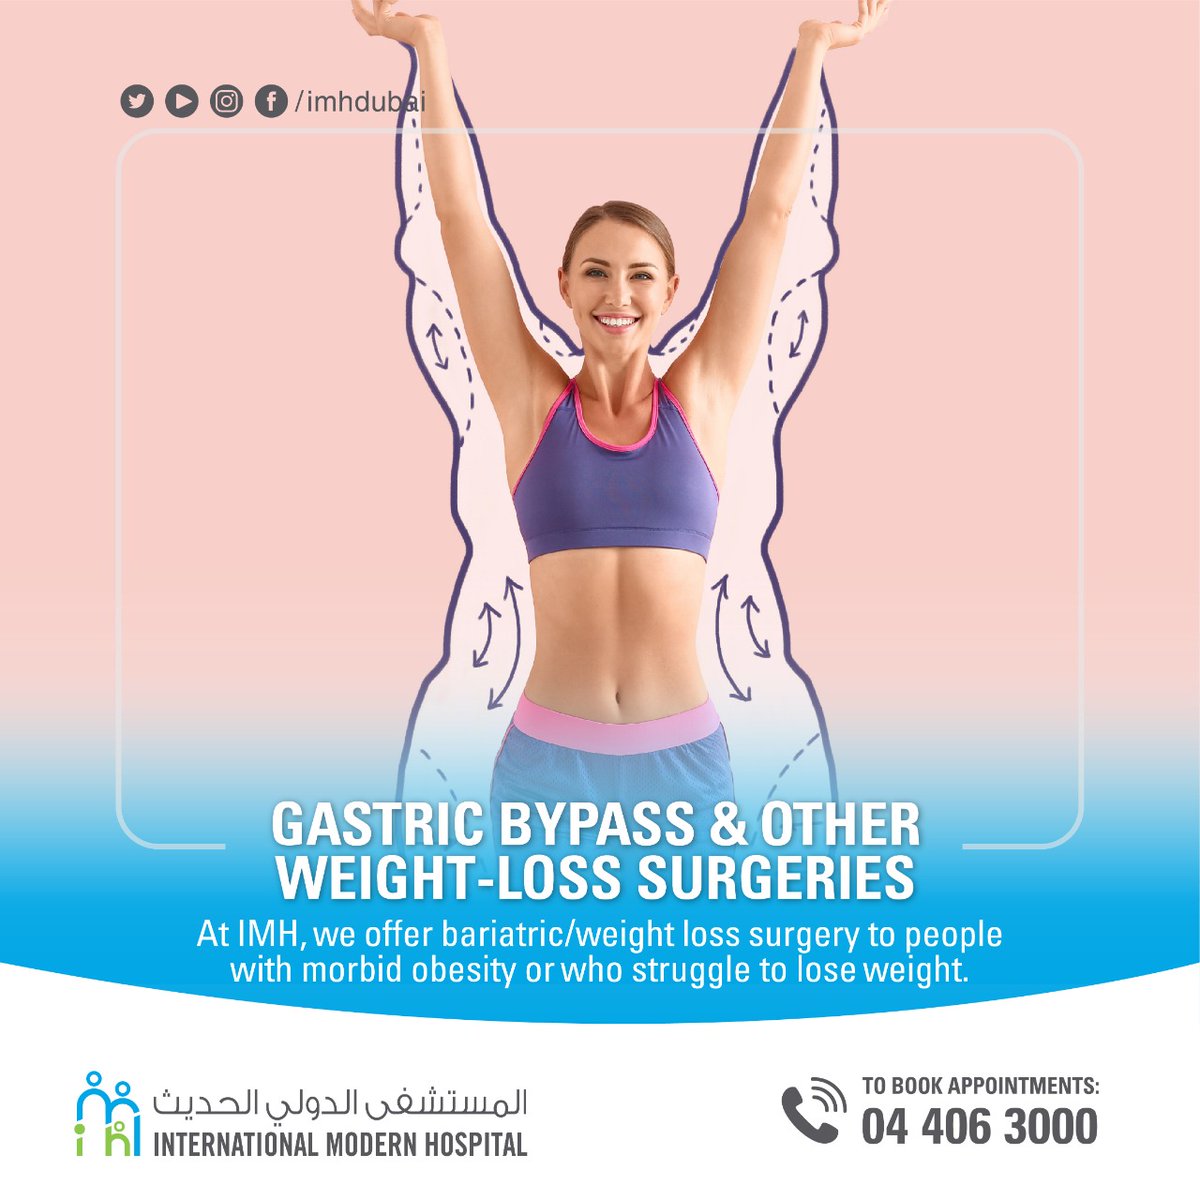 Have you tried out everything and yet you are still struggling with weight loss? It's time to consider our weight loss surgeries. #imhdubai #internationalmodernhospital #itsmyhospital #healthcare #healthcaredubai #hospital #uae #dxb #mydubai #bariatric #weightloss #obesity